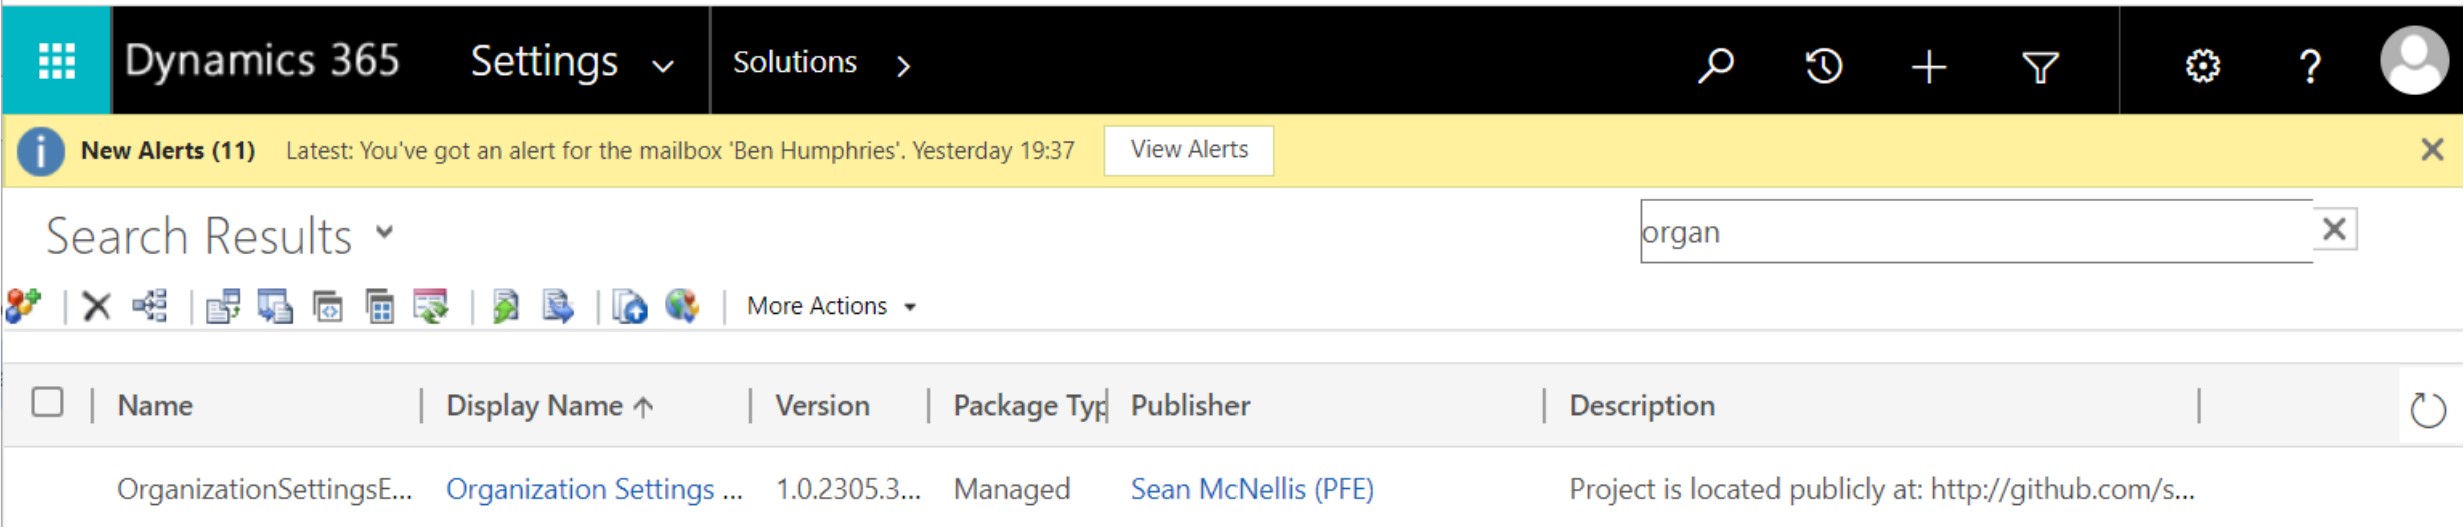 Screenshot showing how to update the solution via the legacy interface on Dynamics 365 CRM.